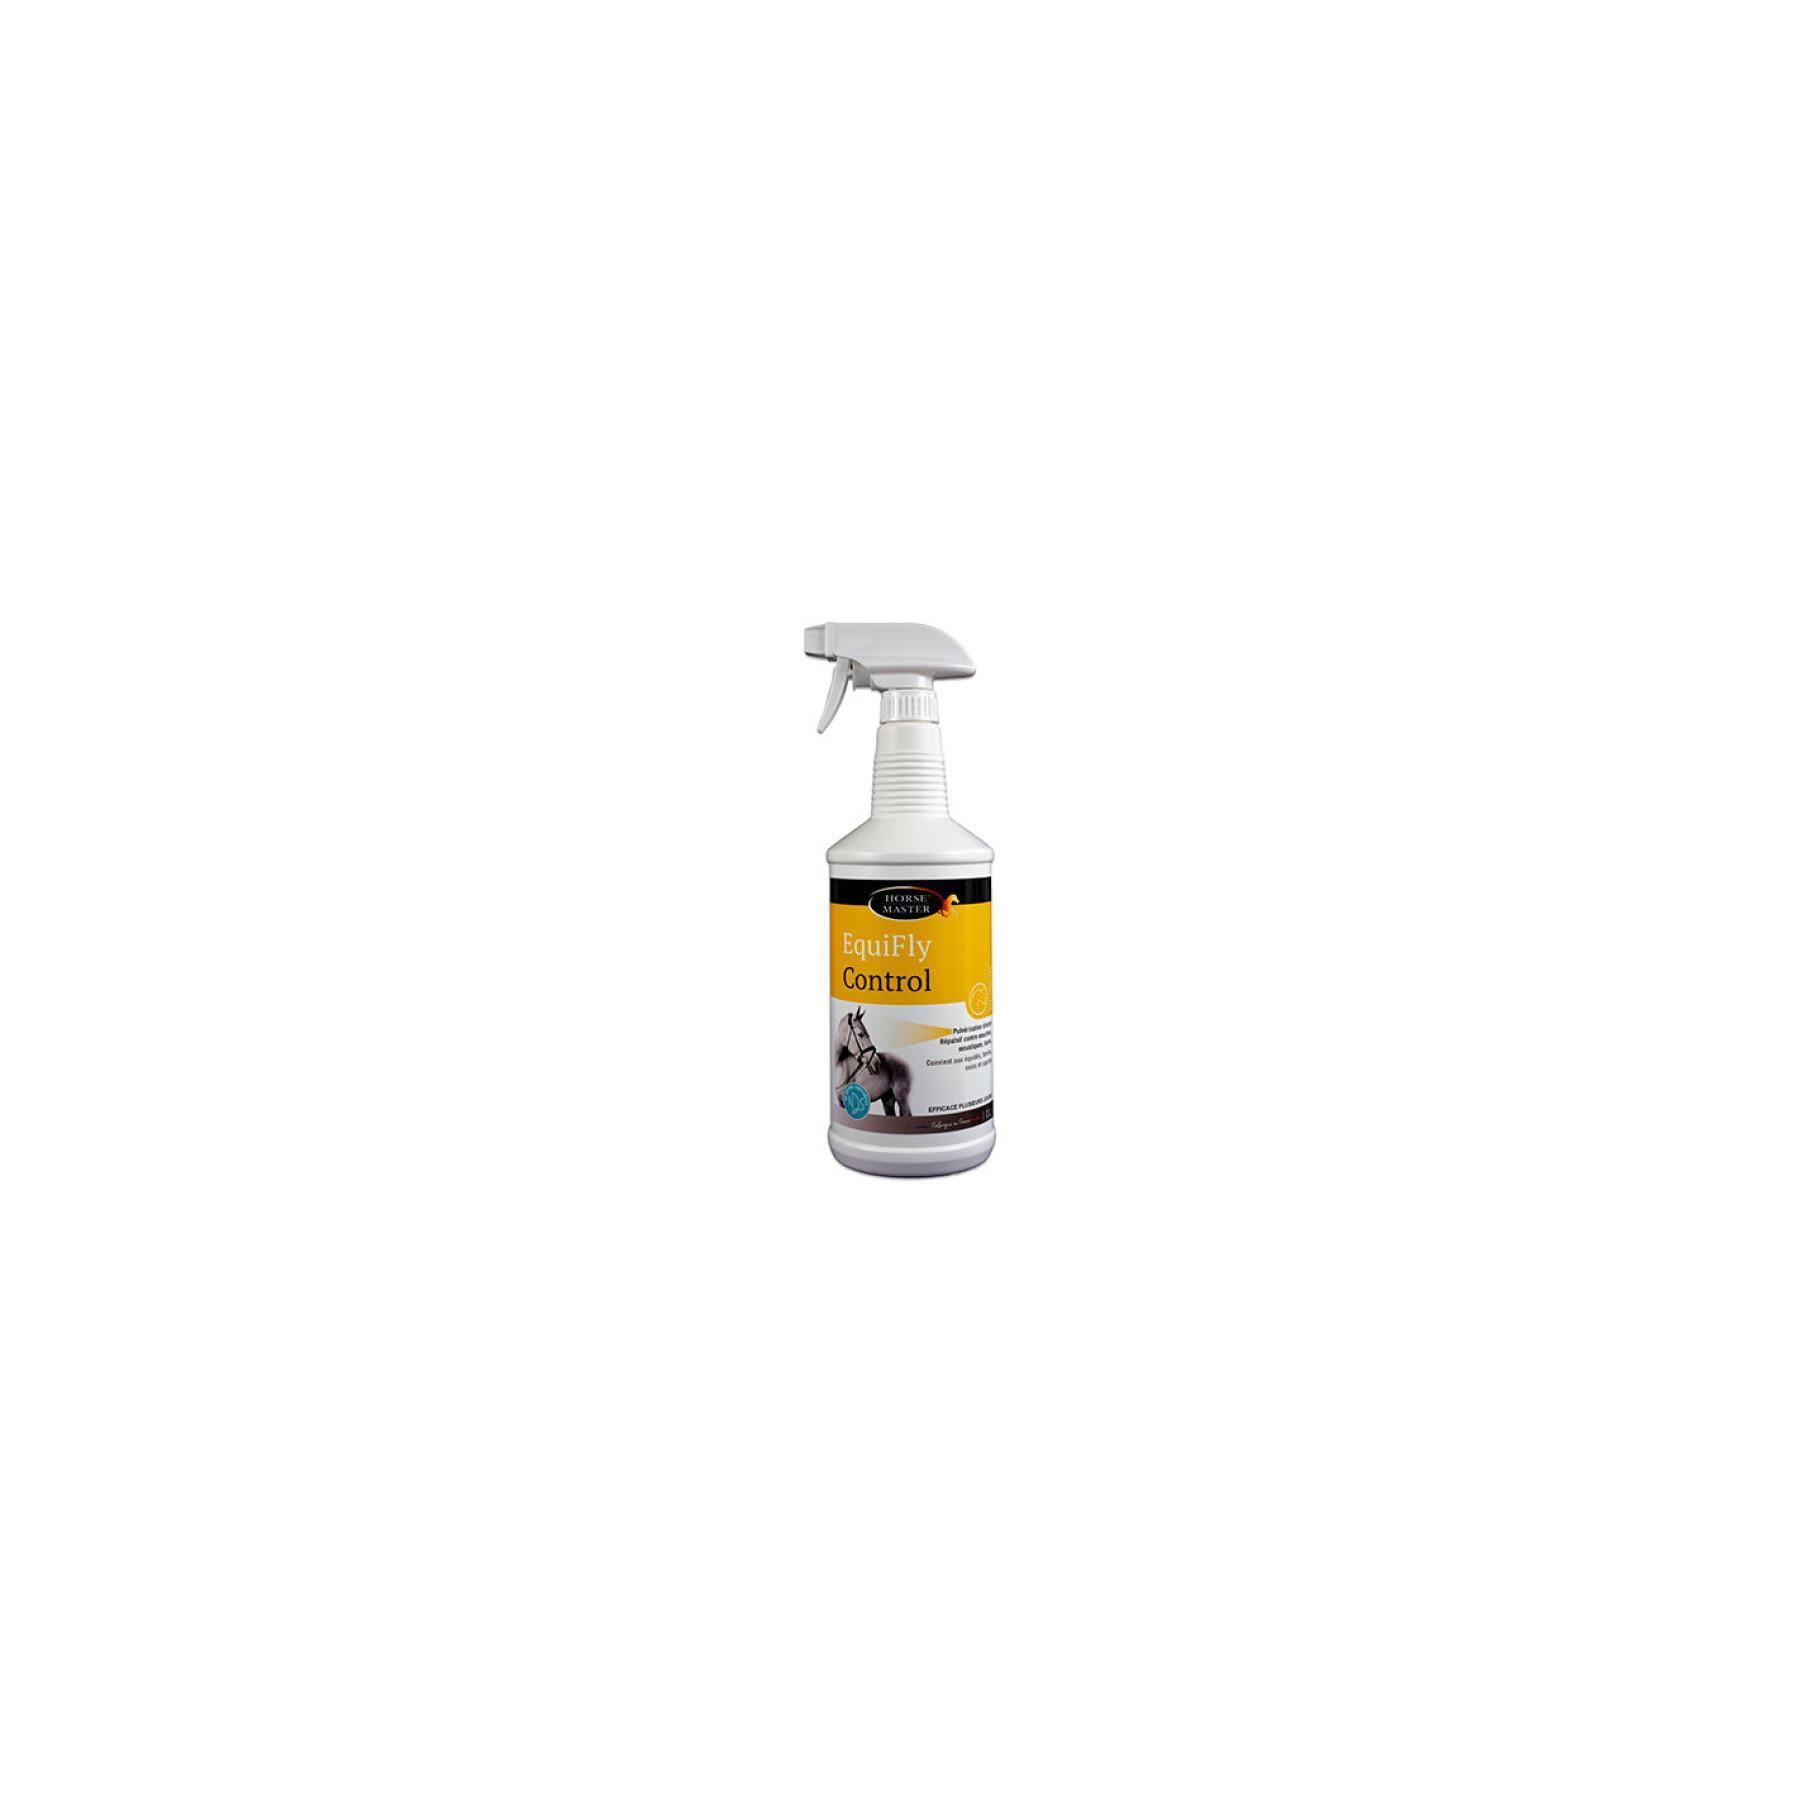 Anti-insect spray Horse Master Equifly Control